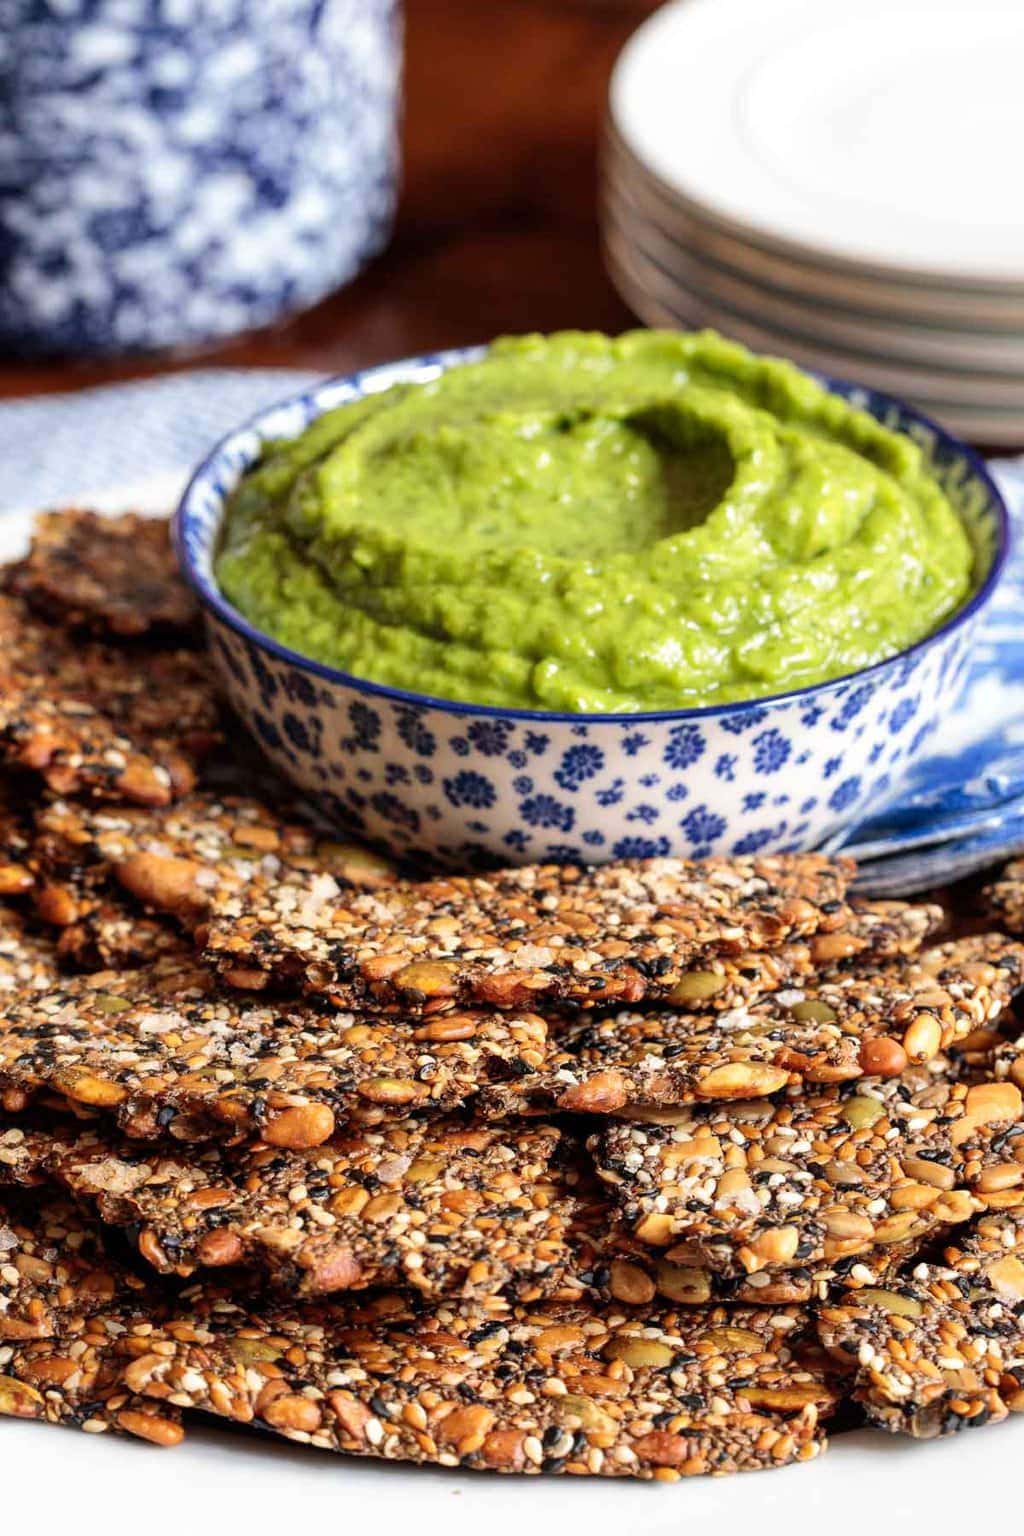 Vertical photo of Pine Nut Seeded Crackers with a dish of avocado dip.